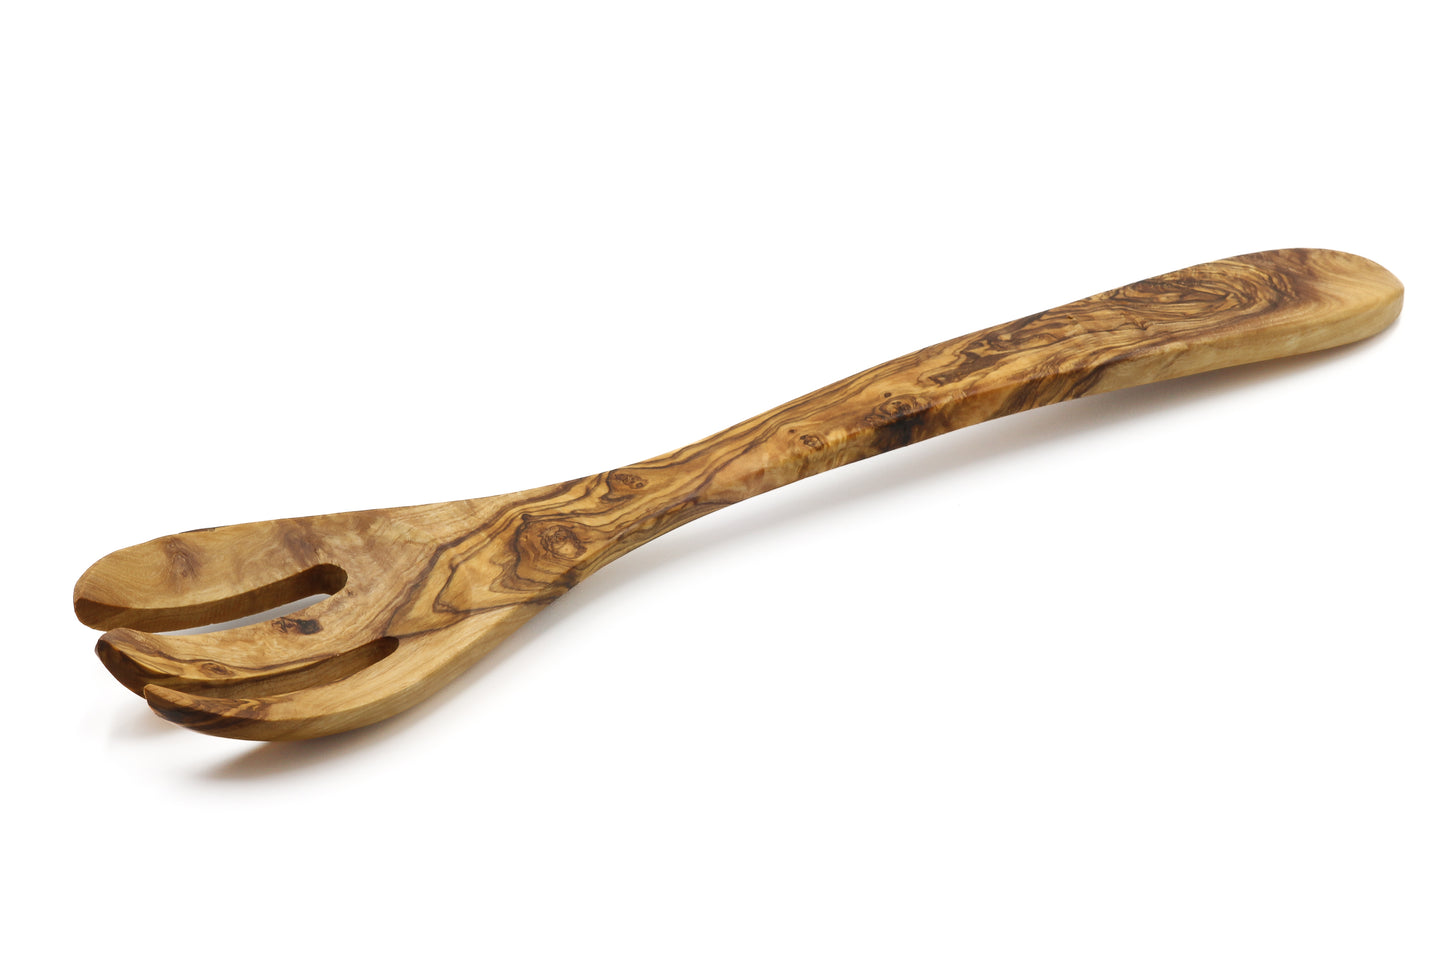 Handcrafted olive wood forked spoon for serving salads